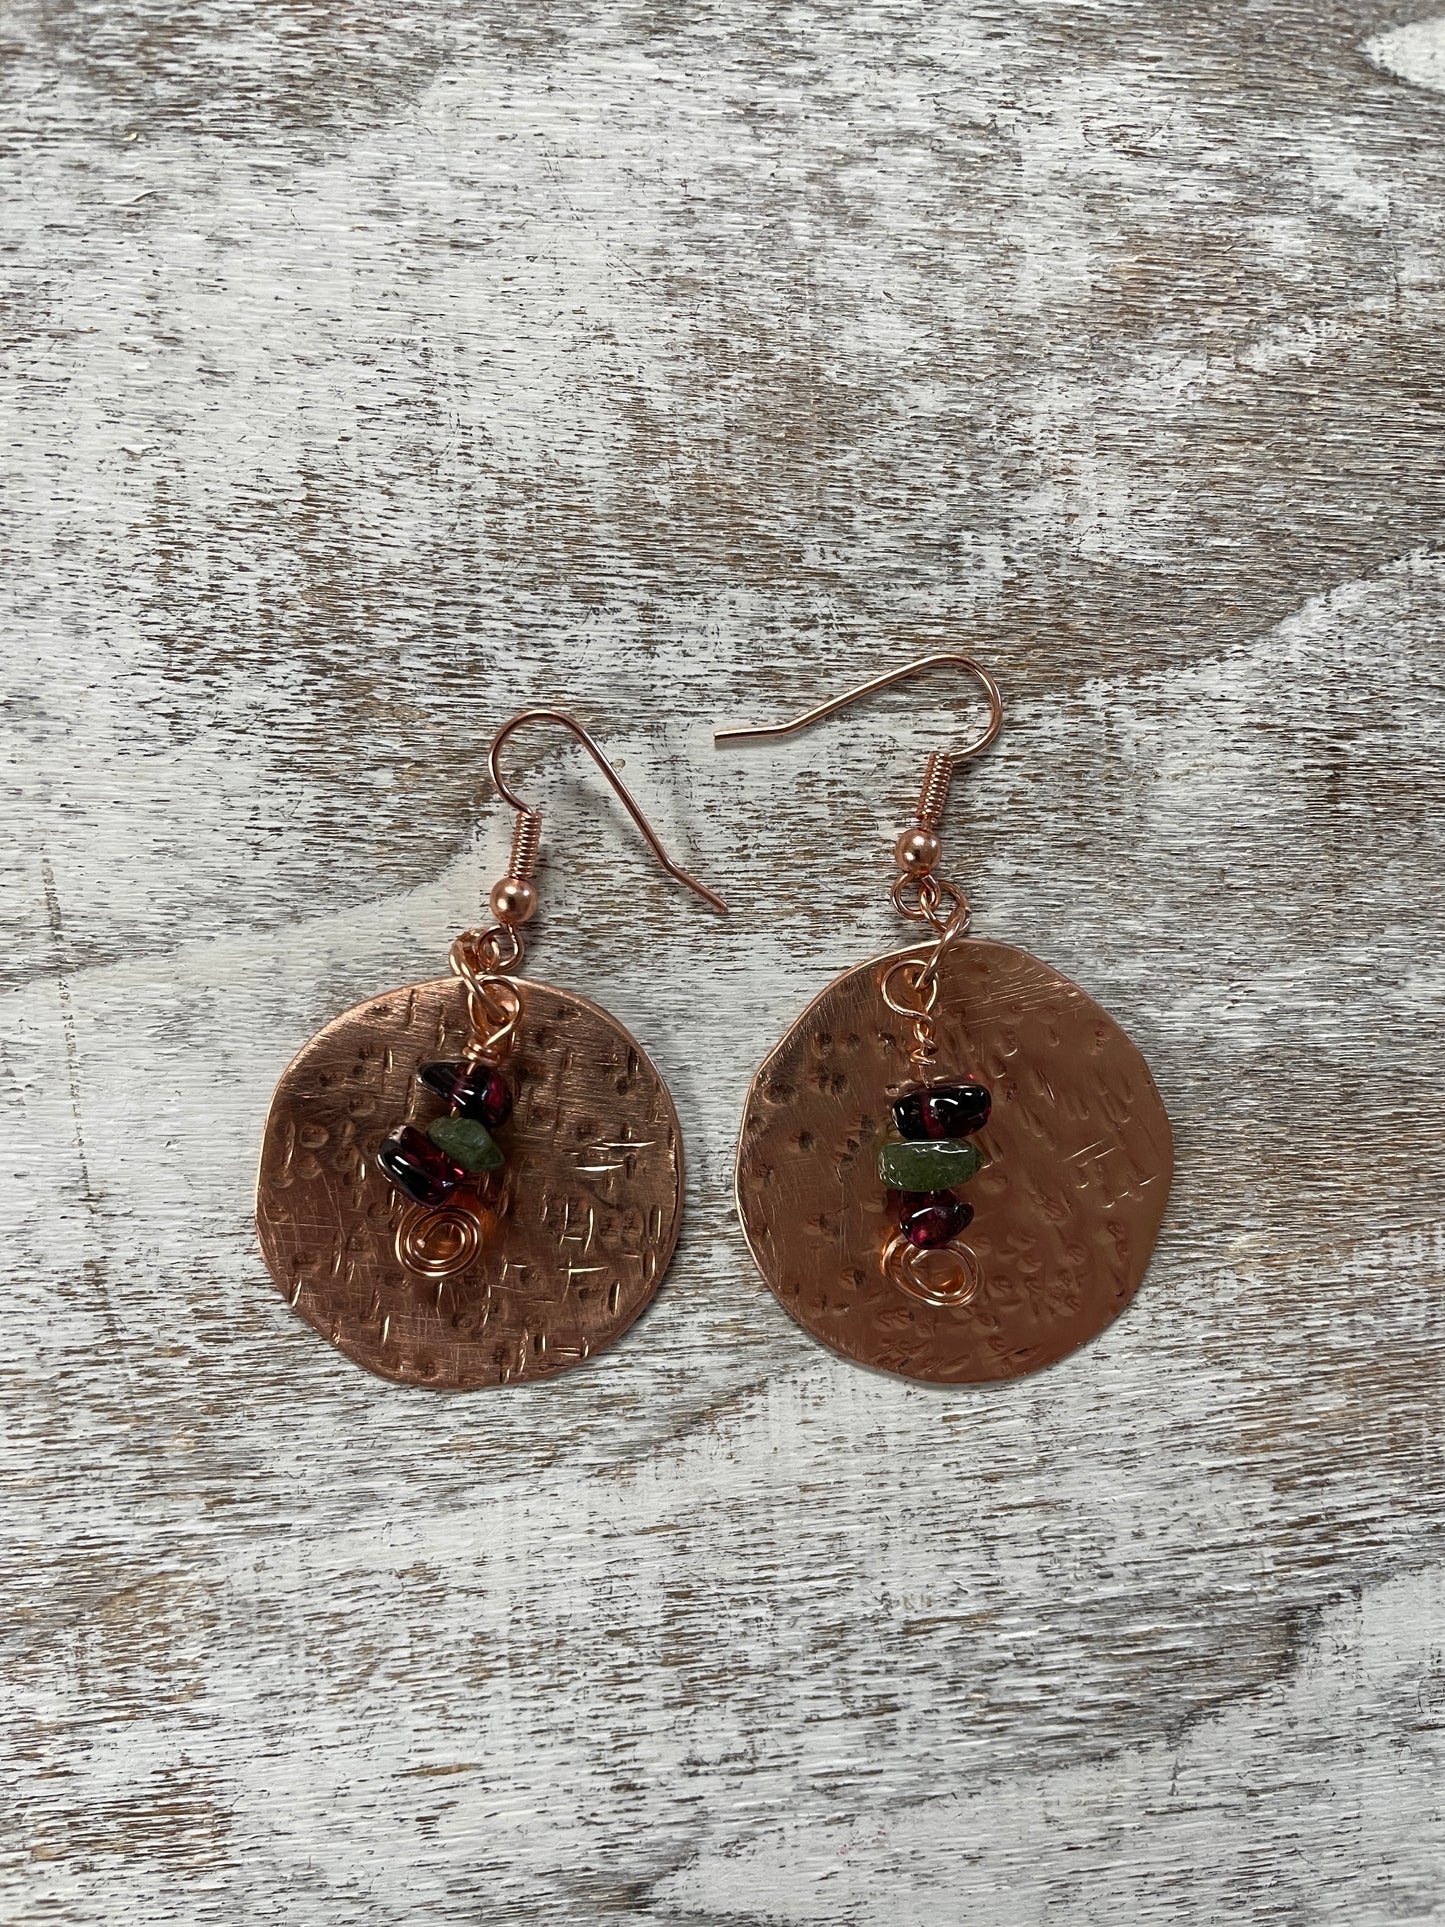 Pounded Copper & Bead Earrings